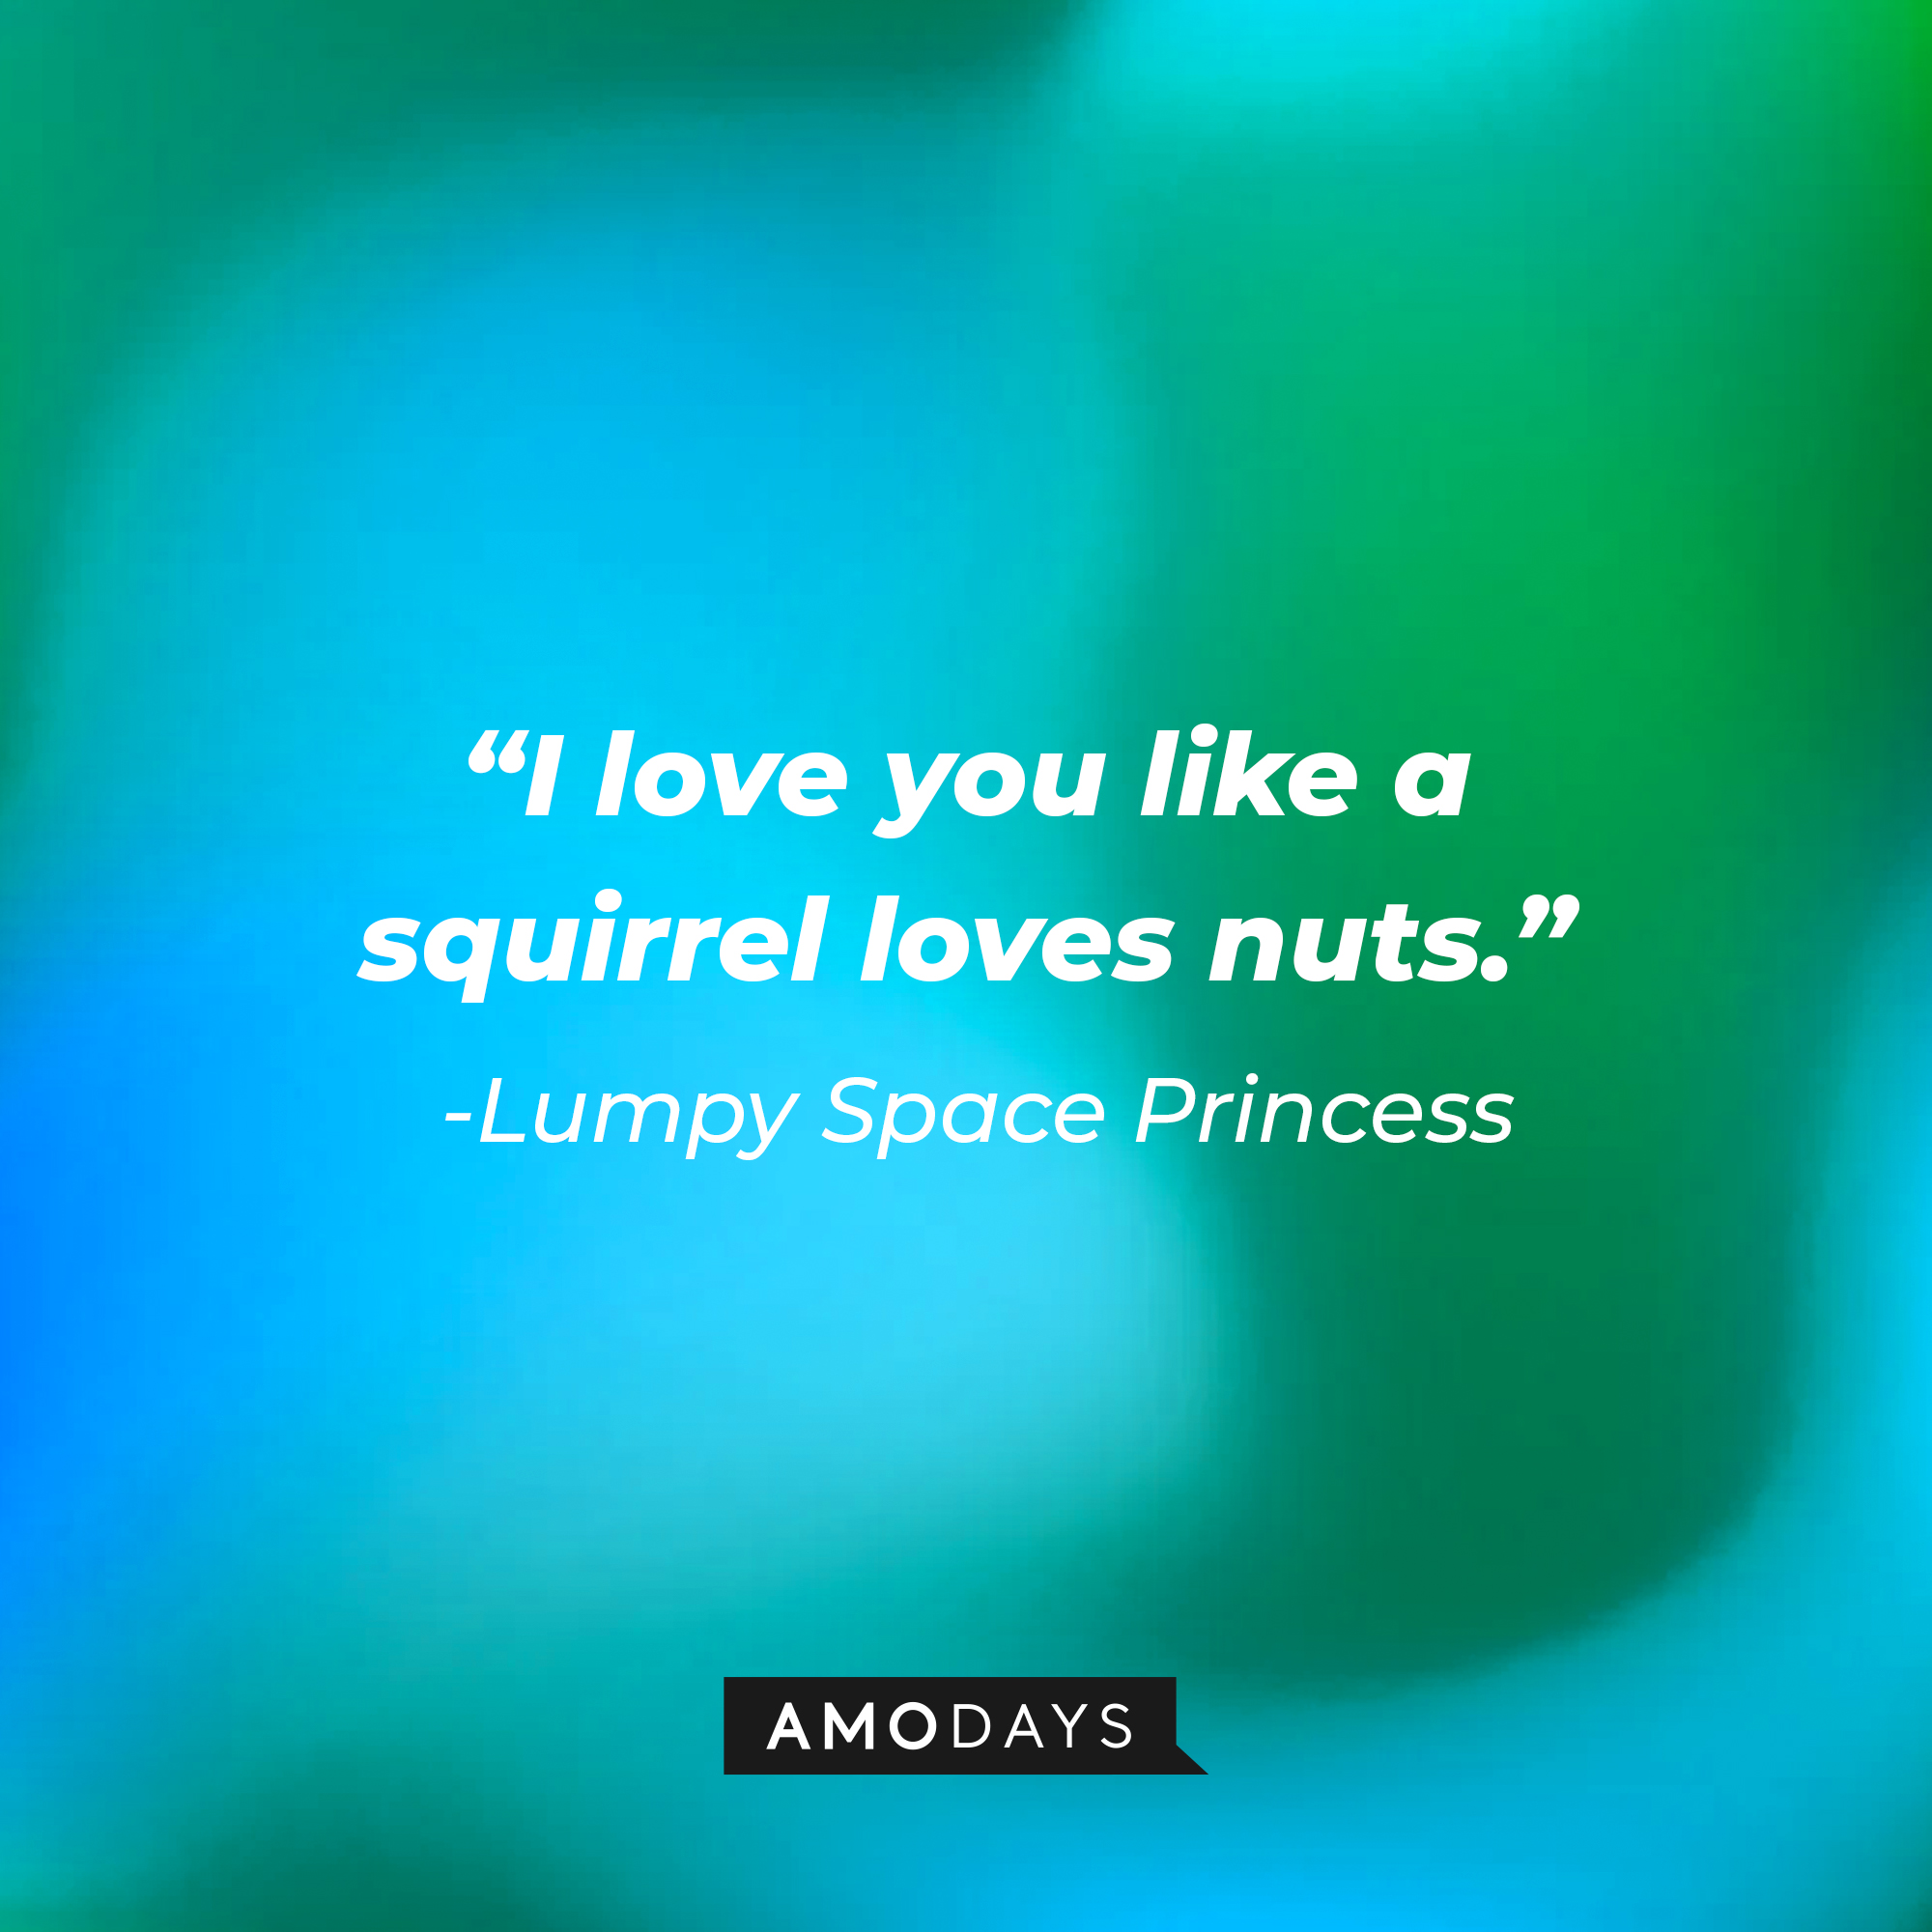 Lumpy Space Princess’s quote: “I love you like a squirrel loves nuts.” | Source: AmoDays